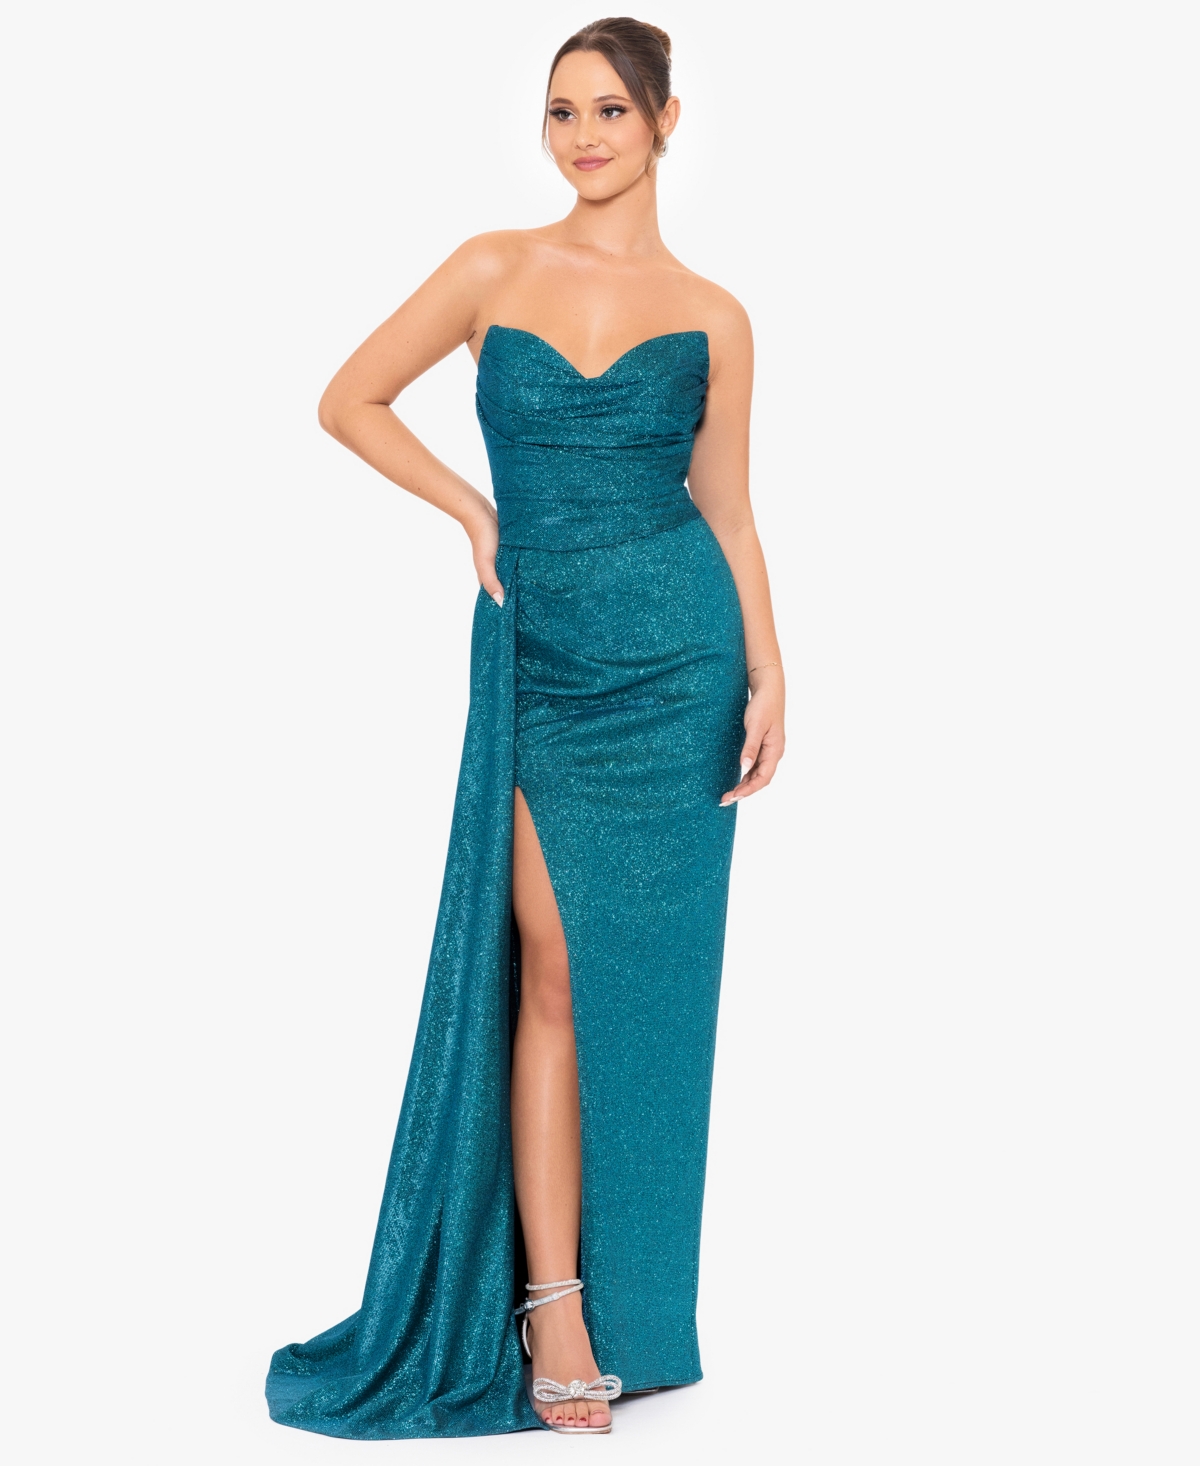 Juniors' Glittered Ruched Strapless Gown - Teal